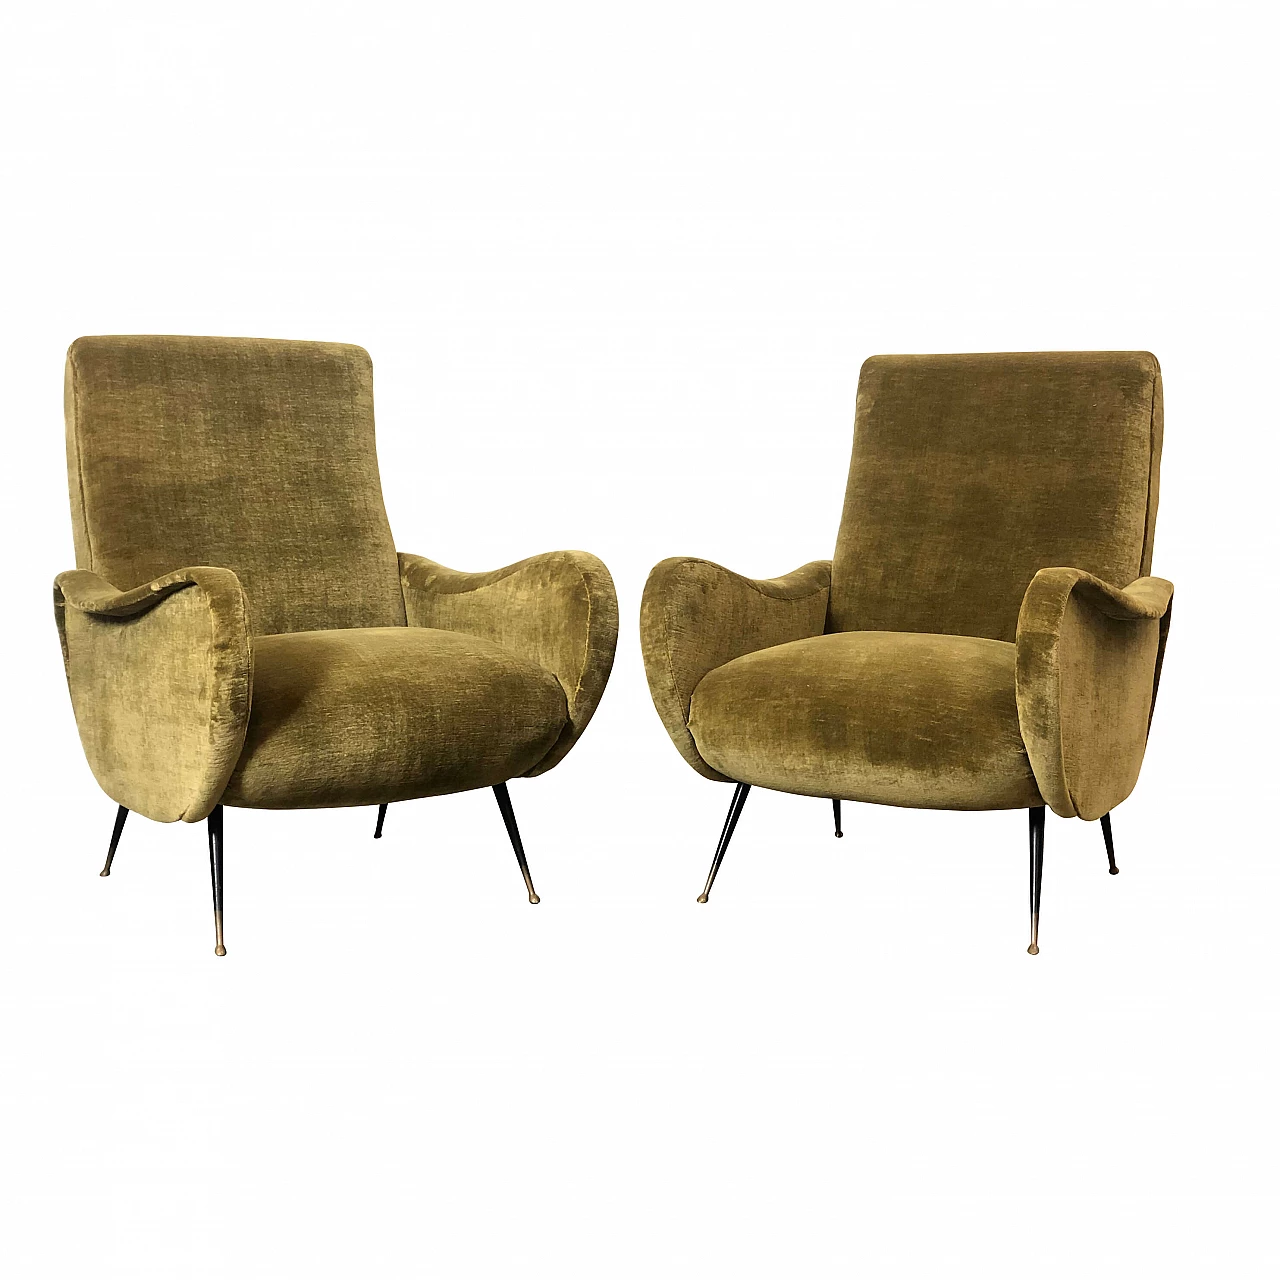 Pair of armchairs Lady style, 1950s 1214186